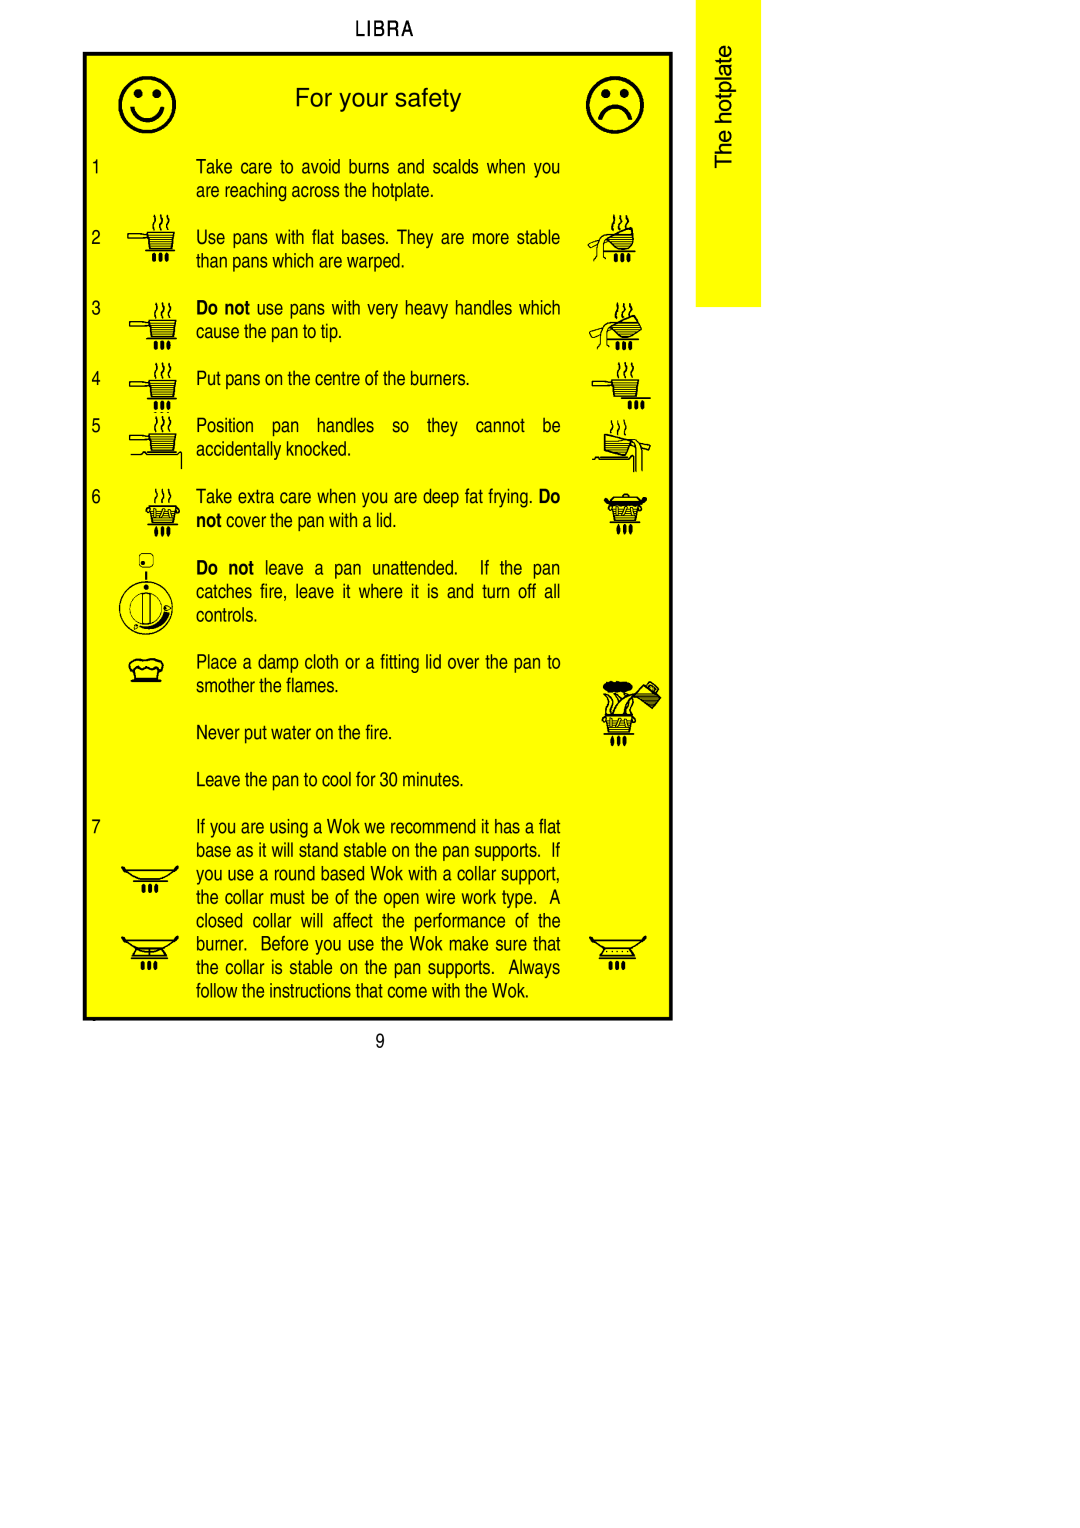 Parkinson Cowan Libra installation instructions For your safety 